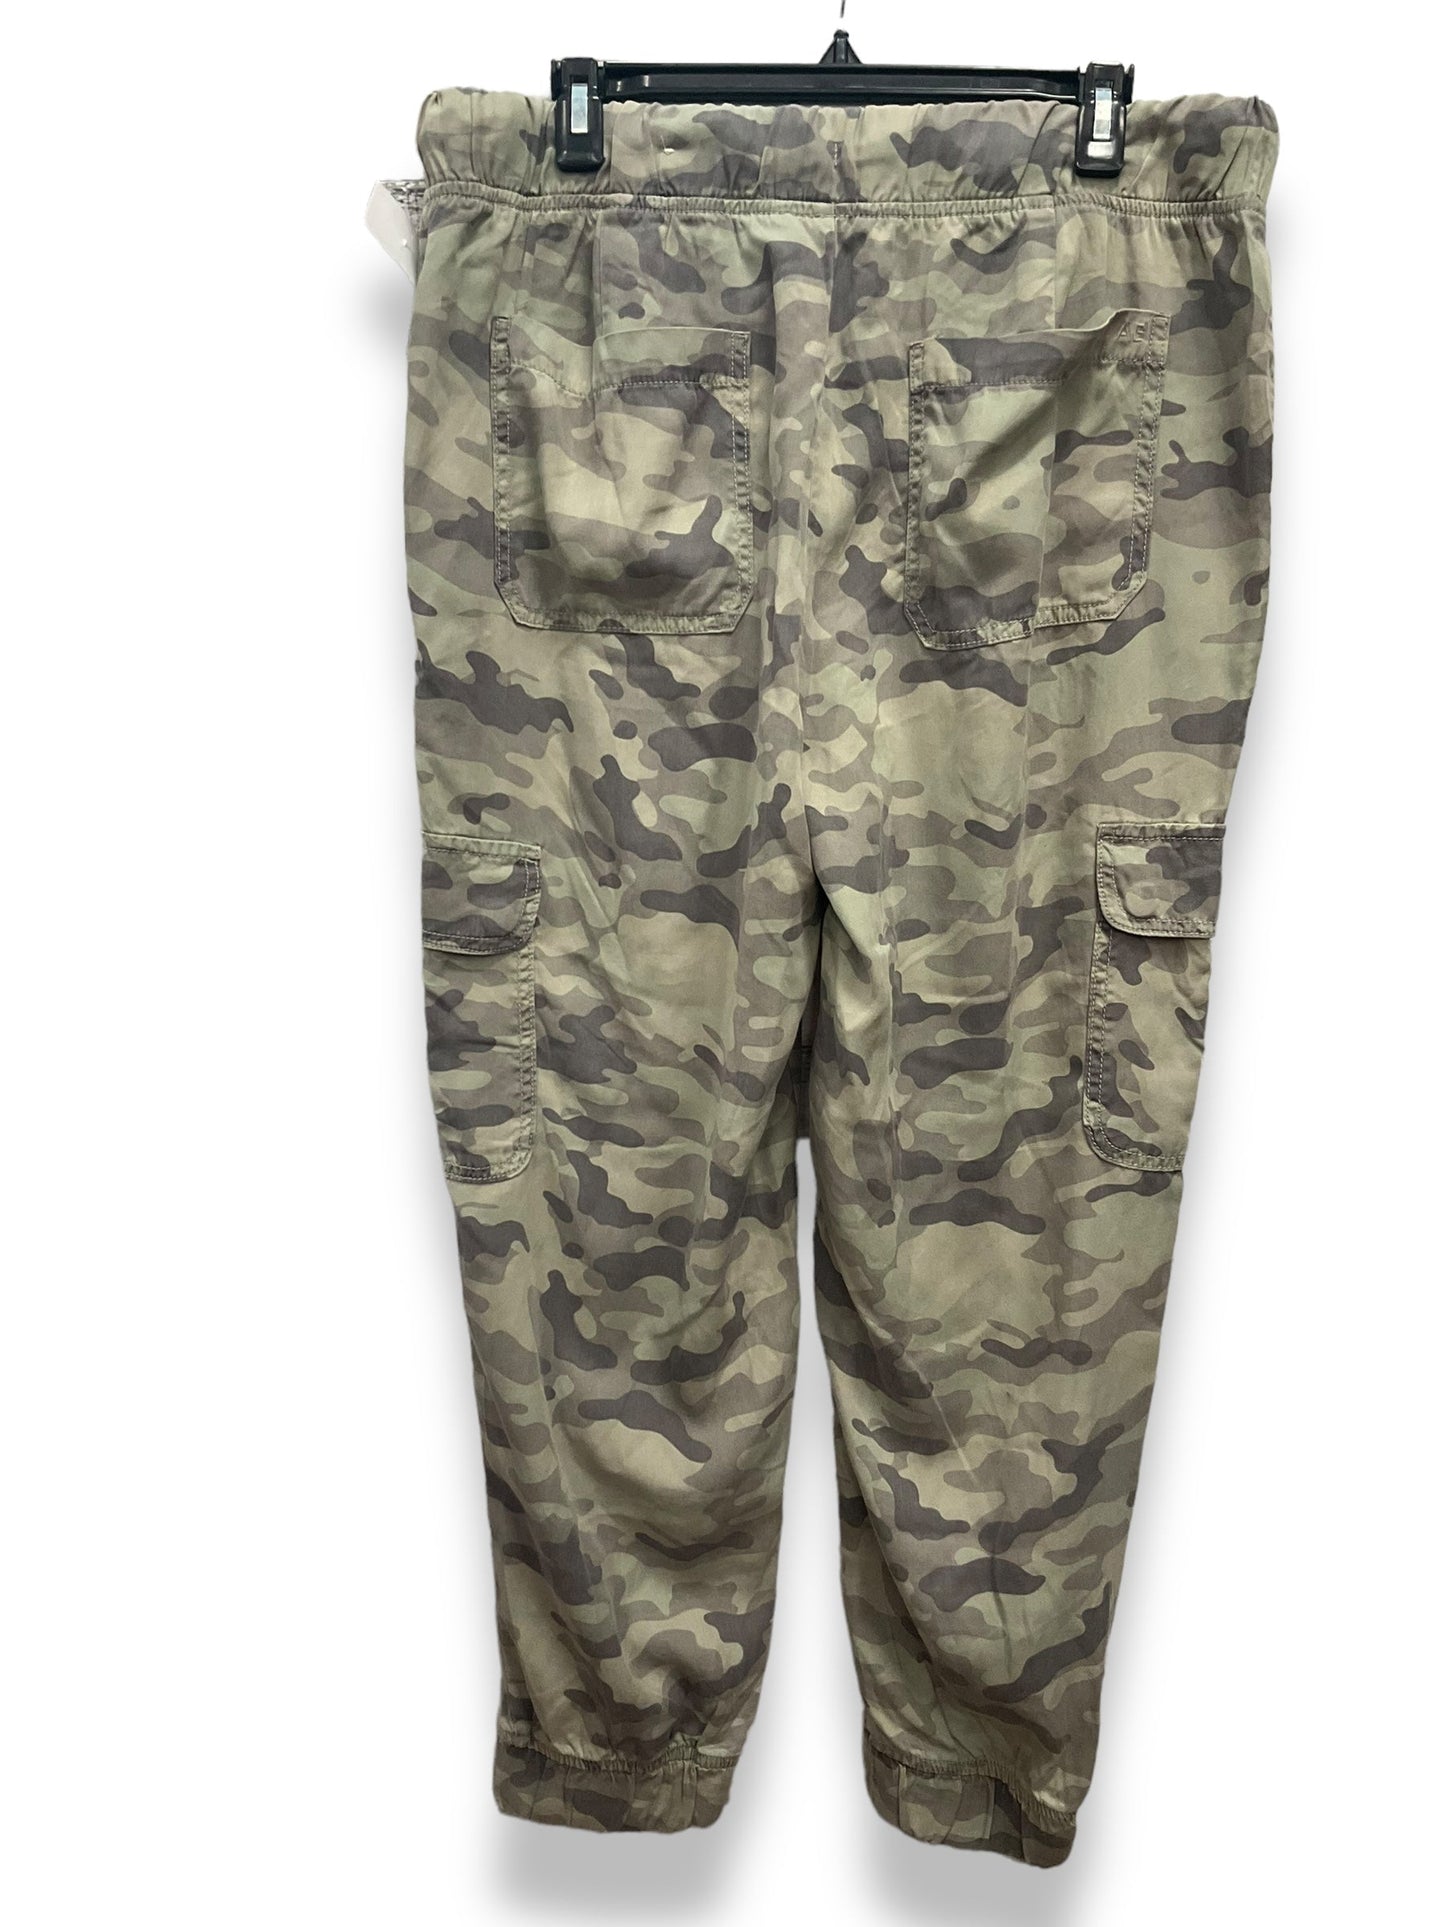 Camouflage Print Pants Cargo & Utility American Eagle, Size L